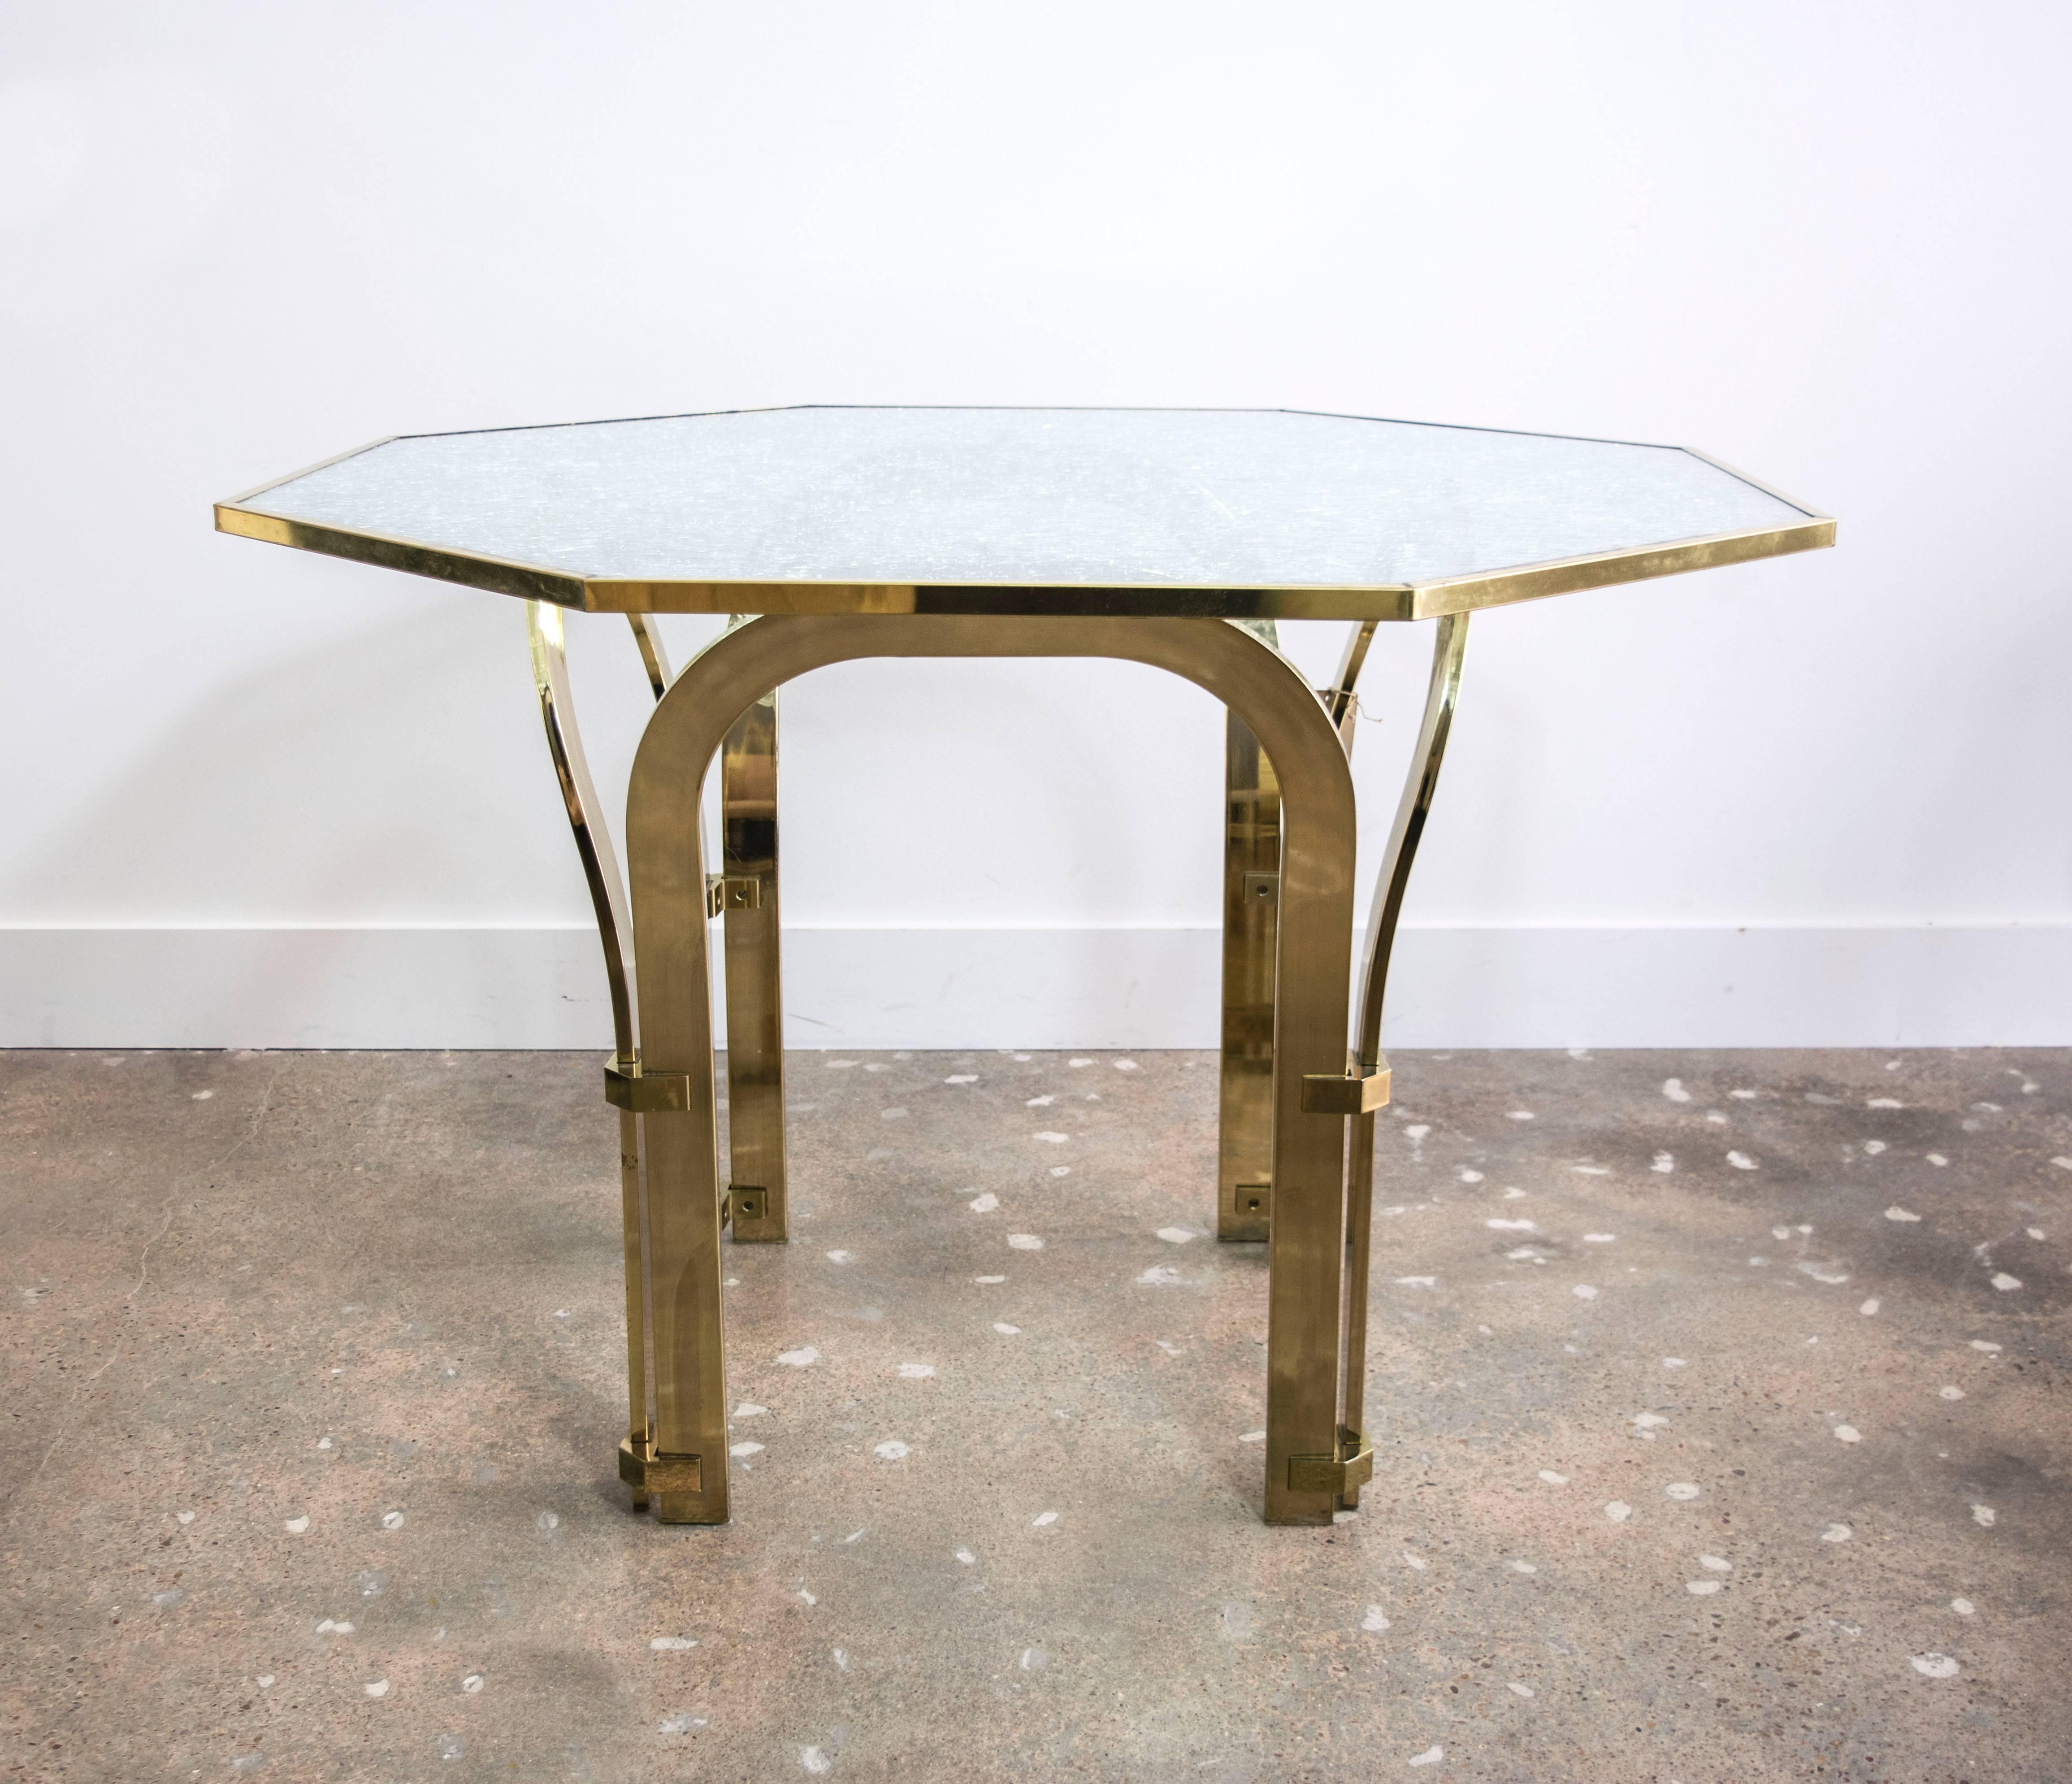 This highly stylized arched brass table is extremely well made and designed.  The original owner had a custom crackle glass top made to look like shattered glass. It is one inch thick and is removable for easy and secure shipping.